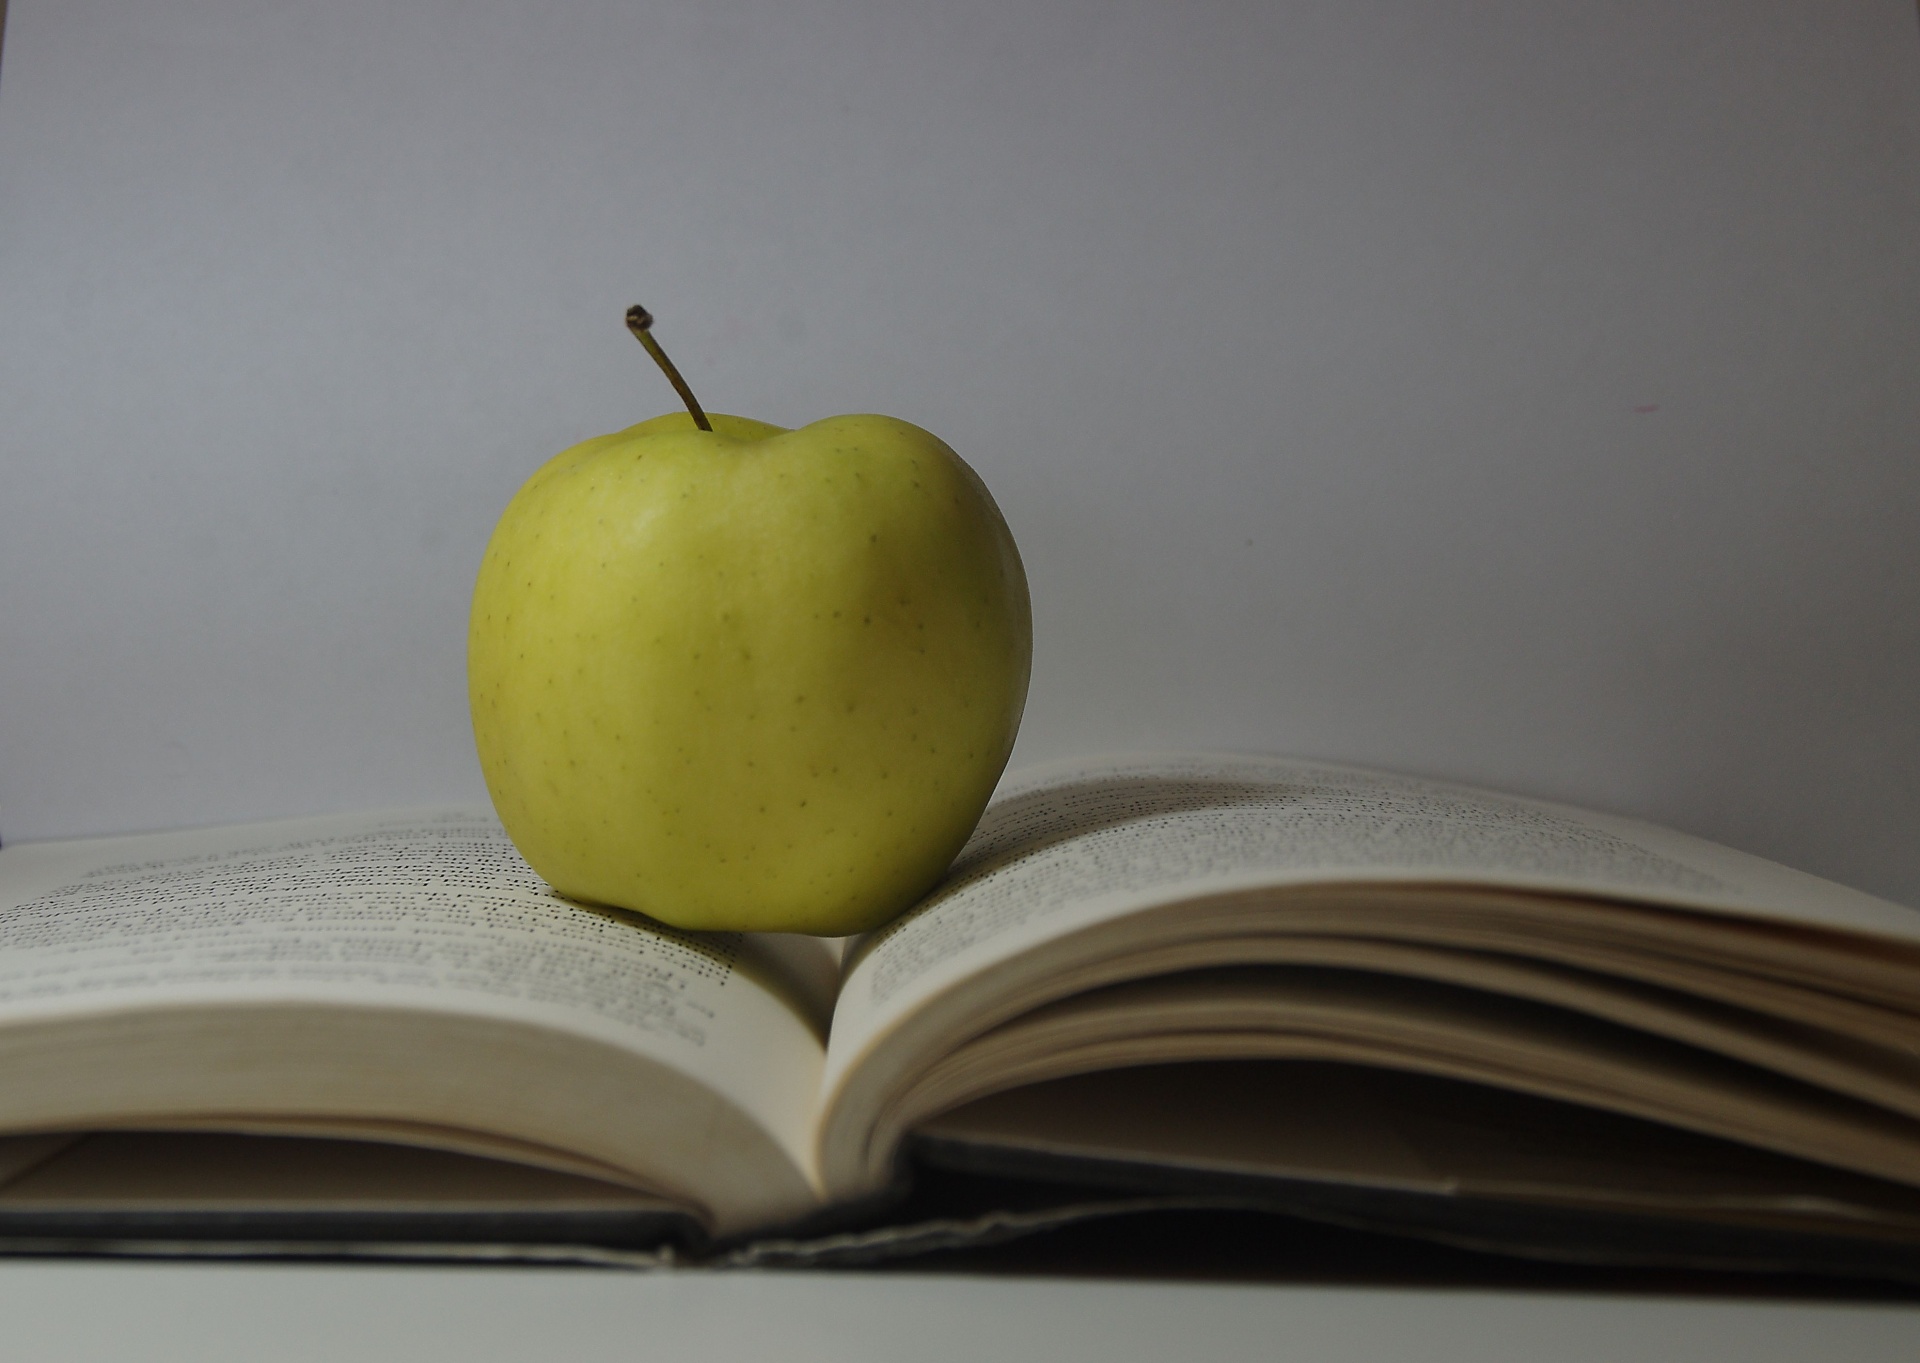 Apple On Book With Grey Backgrou